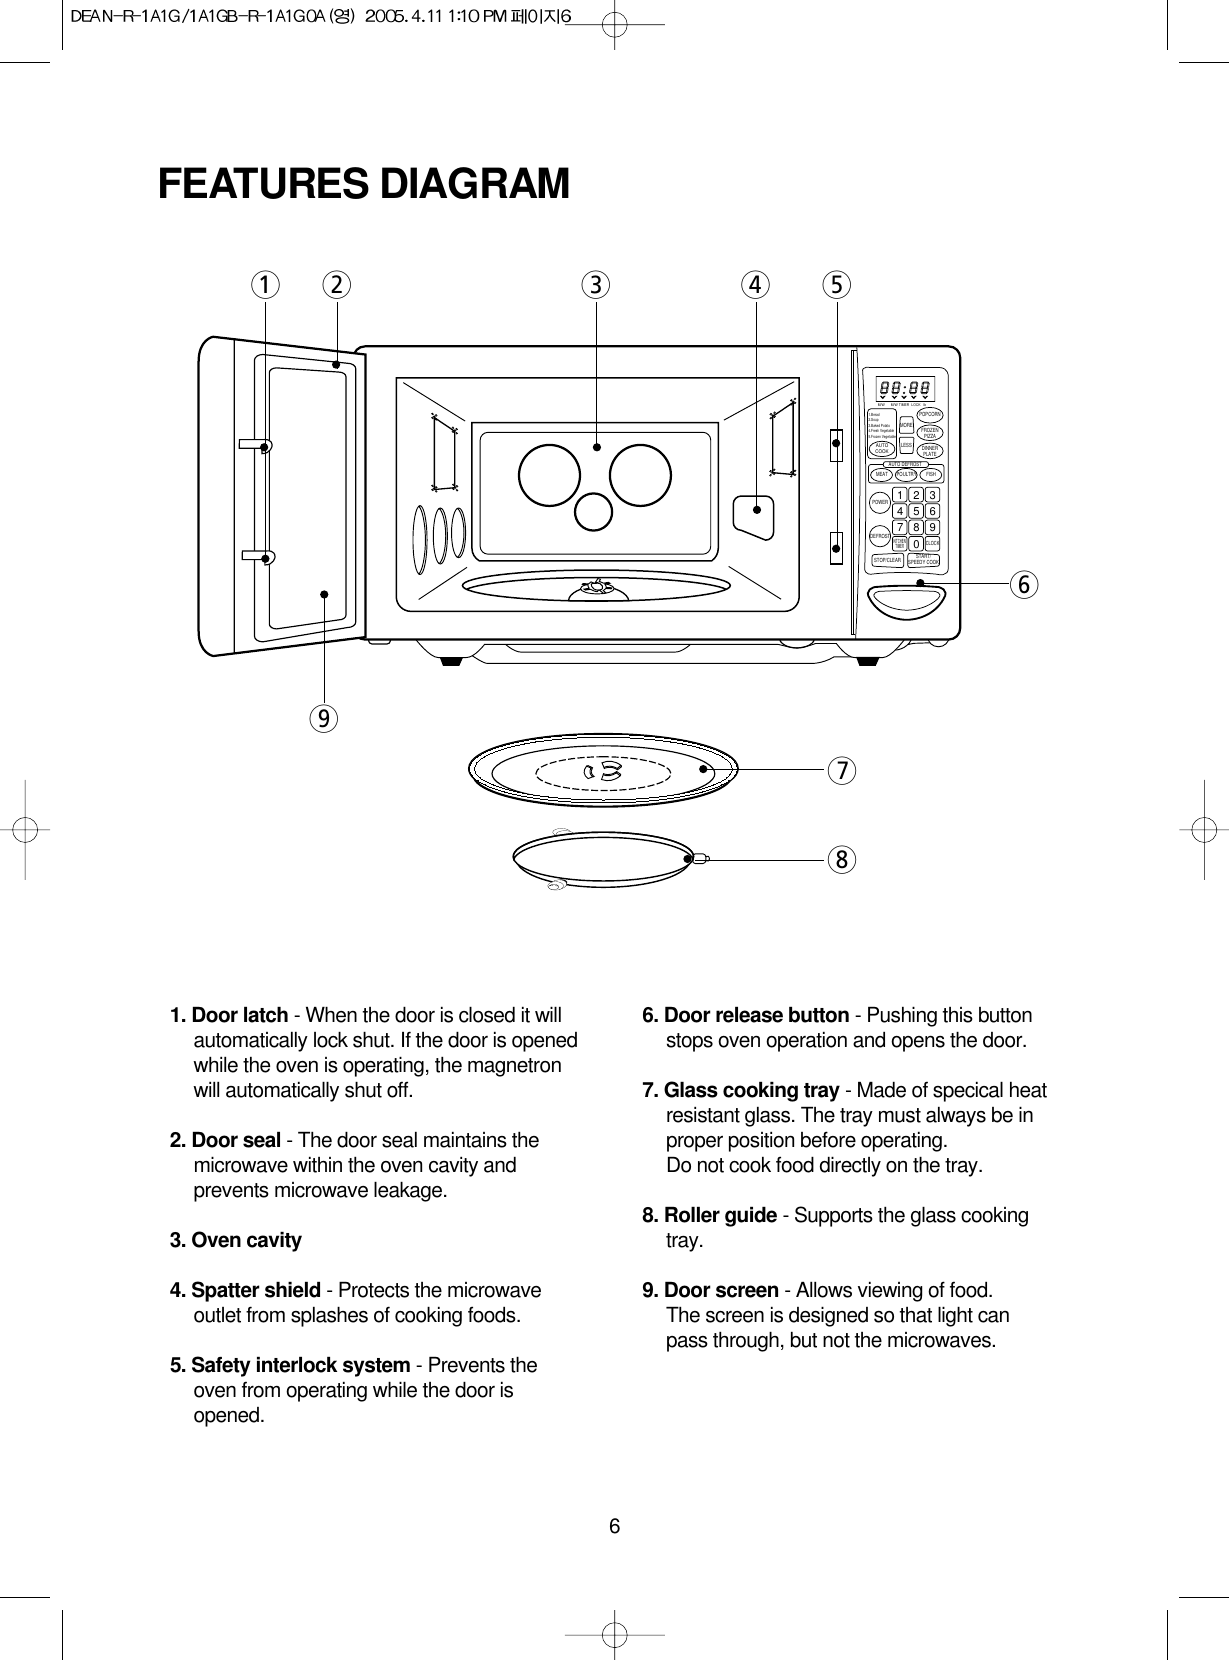 61. Door latch - When the door is closed it willautomatically lock shut. If the door is openedwhile the oven is operating, the magnetronwill automatically shut off.2. Door seal - The door seal maintains themicrowave within the oven cavity andprevents microwave leakage.3. Oven cavity4. Spatter shield - Protects the microwaveoutlet from splashes of cooking foods.5. Safety interlock system - Prevents theoven from operating while the door isopened.6. Door release button - Pushing this buttonstops oven operation and opens the door.7. Glass cooking tray - Made of specical heatresistant glass. The tray must always be inproper position before operating. Do not cook food directly on the tray.8. Roller guide - Supports the glass cookingtray.9. Door screen - Allows viewing of food. The screen is designed so that light canpass through, but not the microwaves.FEATURES DIAGRAMM/W M/W LOCK lbTIMERPOPCORNFROZENPIZZADINNERPLATEMORELESSAUTO DEFROSTMEATPOWERPOULTRY FISHDEFROSTSTOP/CLEARCLOCKKITCHENTIMER1 2 34 5 67 8 90START/SPEEDY COOKAUTOCOOK1.Bread2.Soup3.Baked Potato4.Fresh Vegetable5.Frozen Vegetable12 3 4 59786